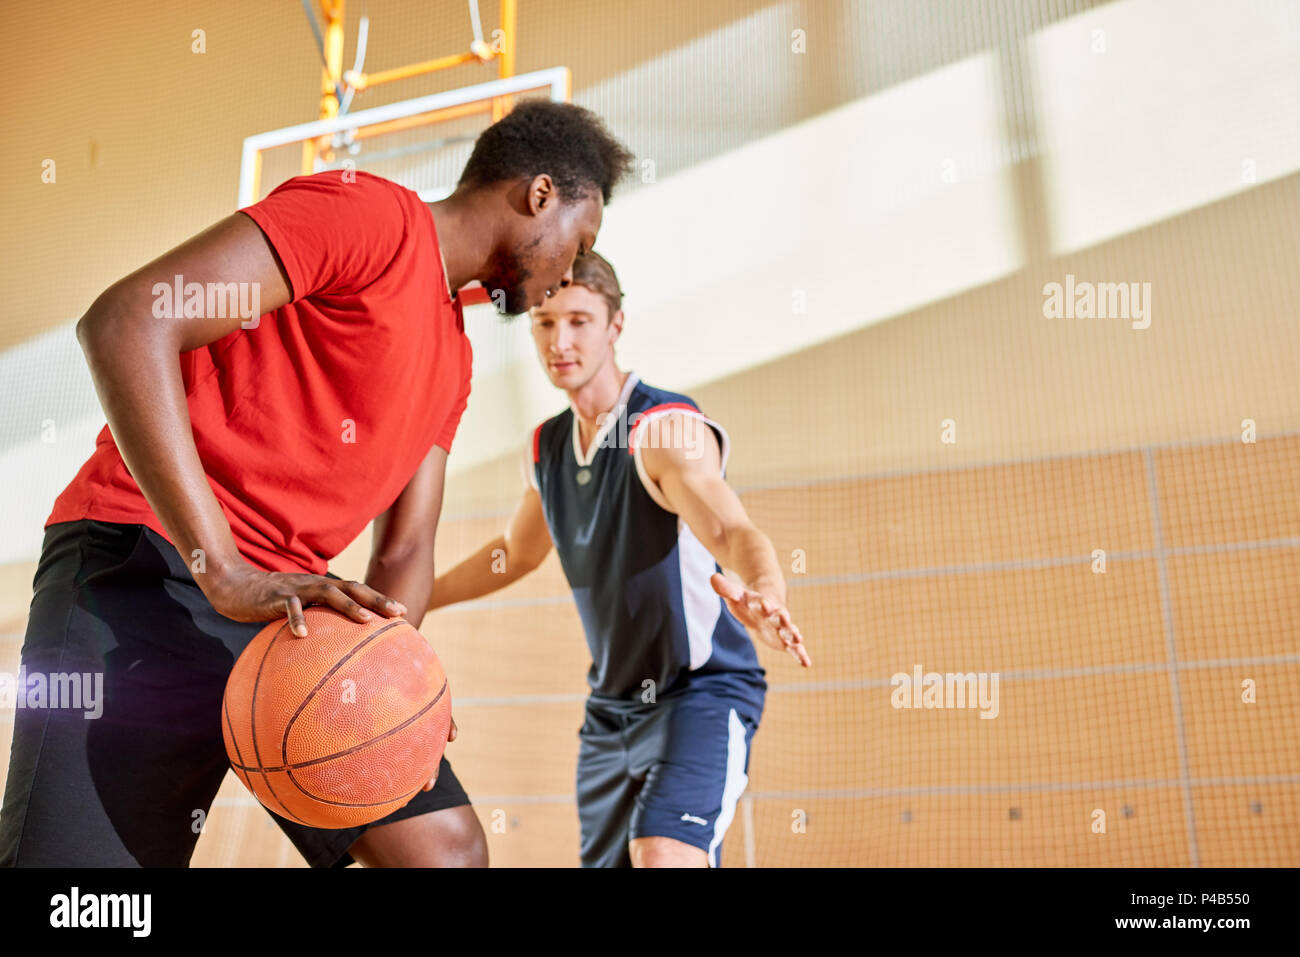 Men playing basketball together Stock Photo